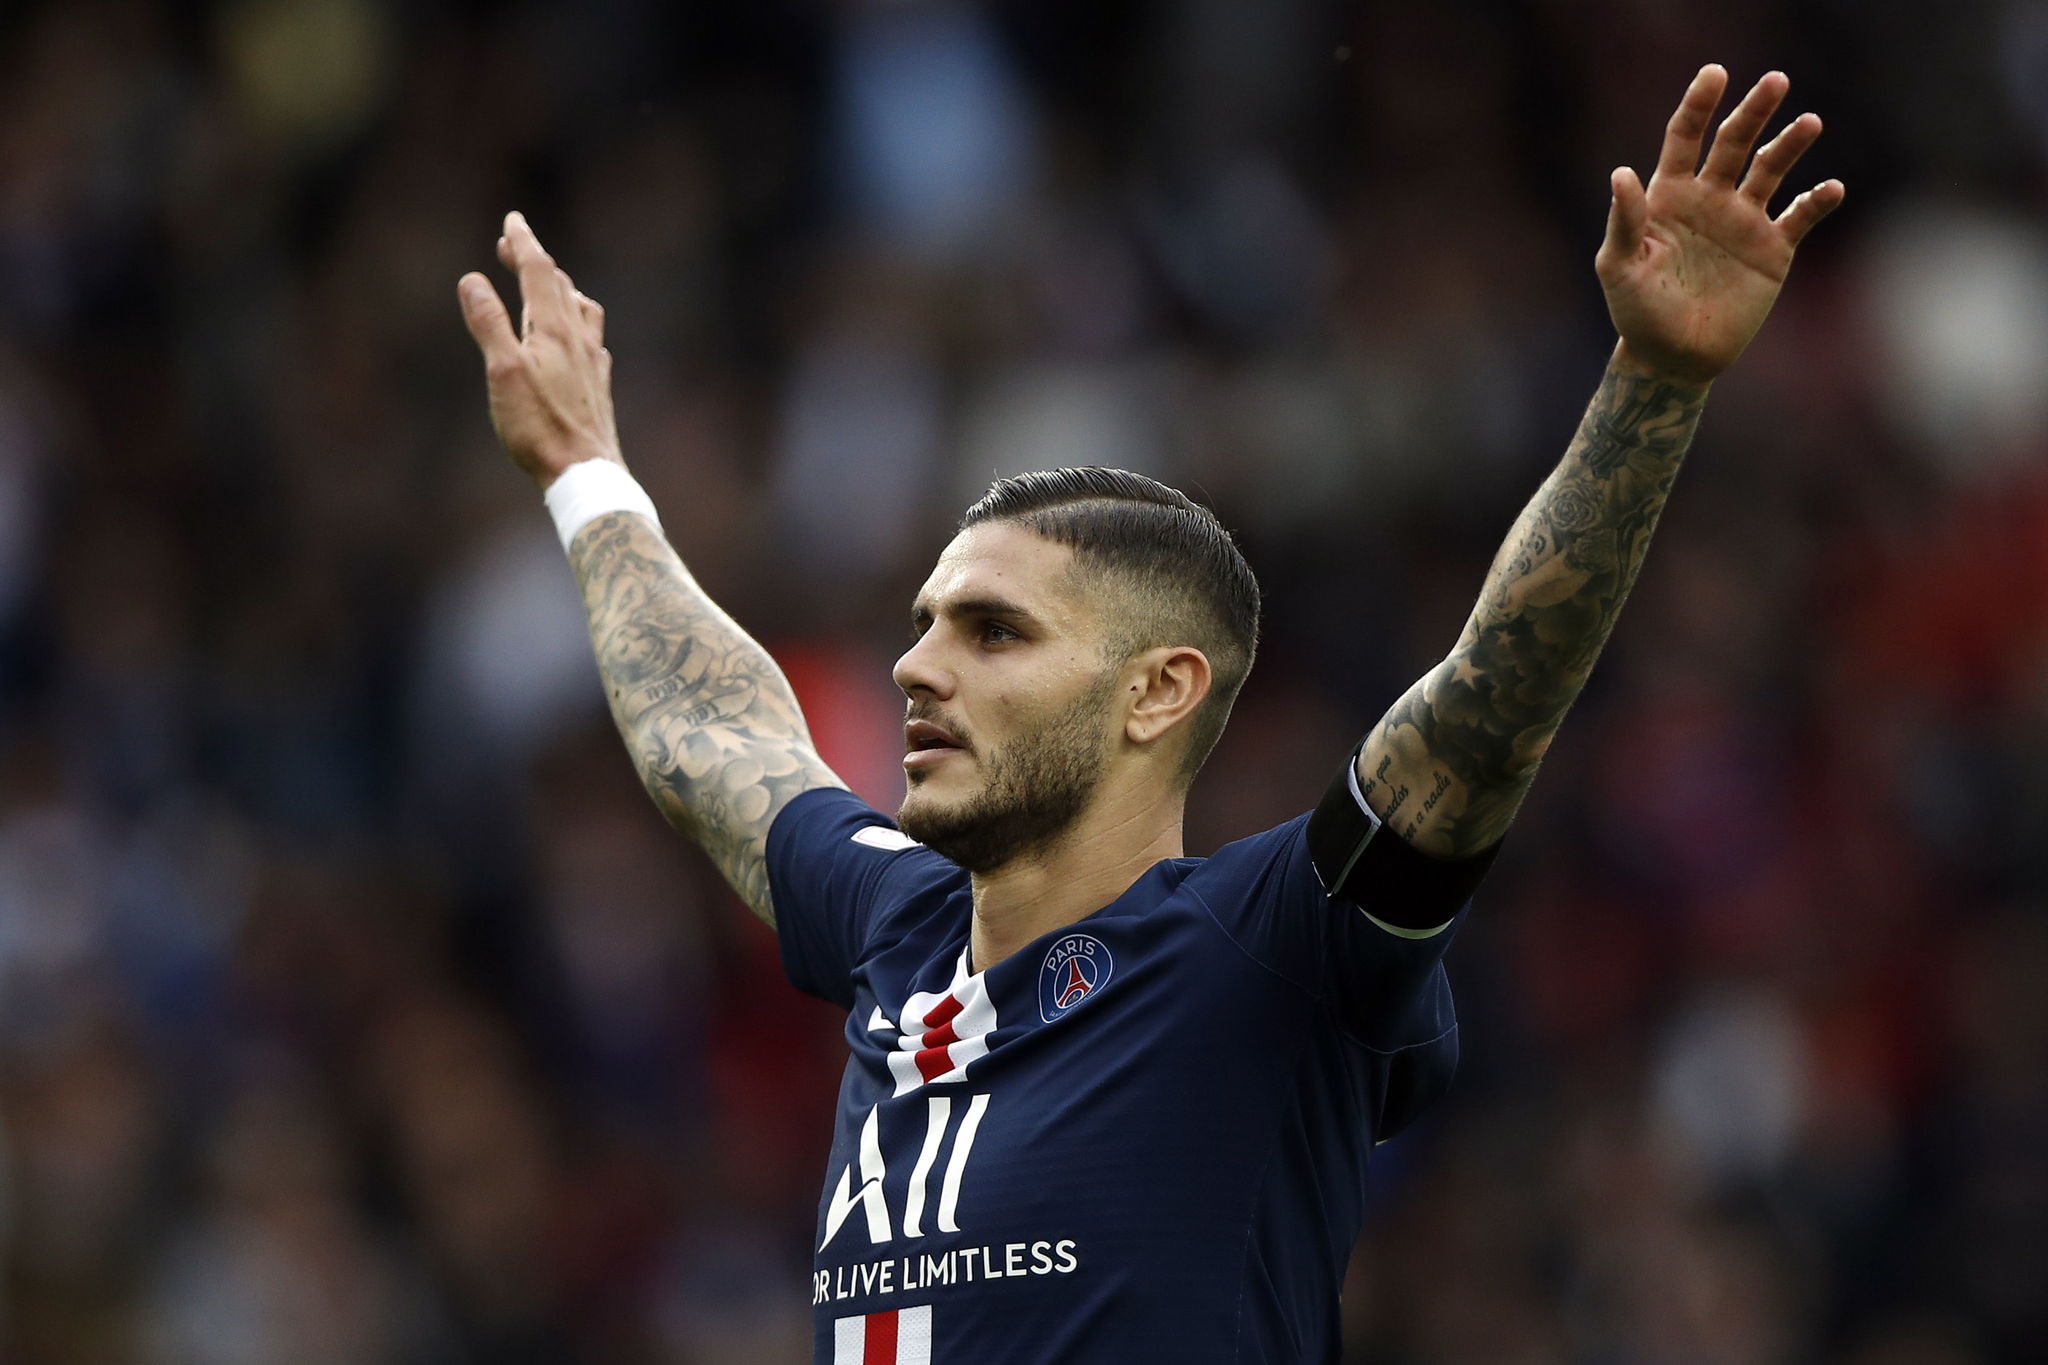 Paris (France), 05/10/2019.- Paris Saint Germains Mauro Icardi celebrates after scoring the 2-0 lead during the French Ligue 1 soccer match between <HIT>PSG</HIT> and Angers at the Parc des Princes stadium in Paris, France, 05 October 2019. (Francia) EFE/EPA/YOAN VALAT